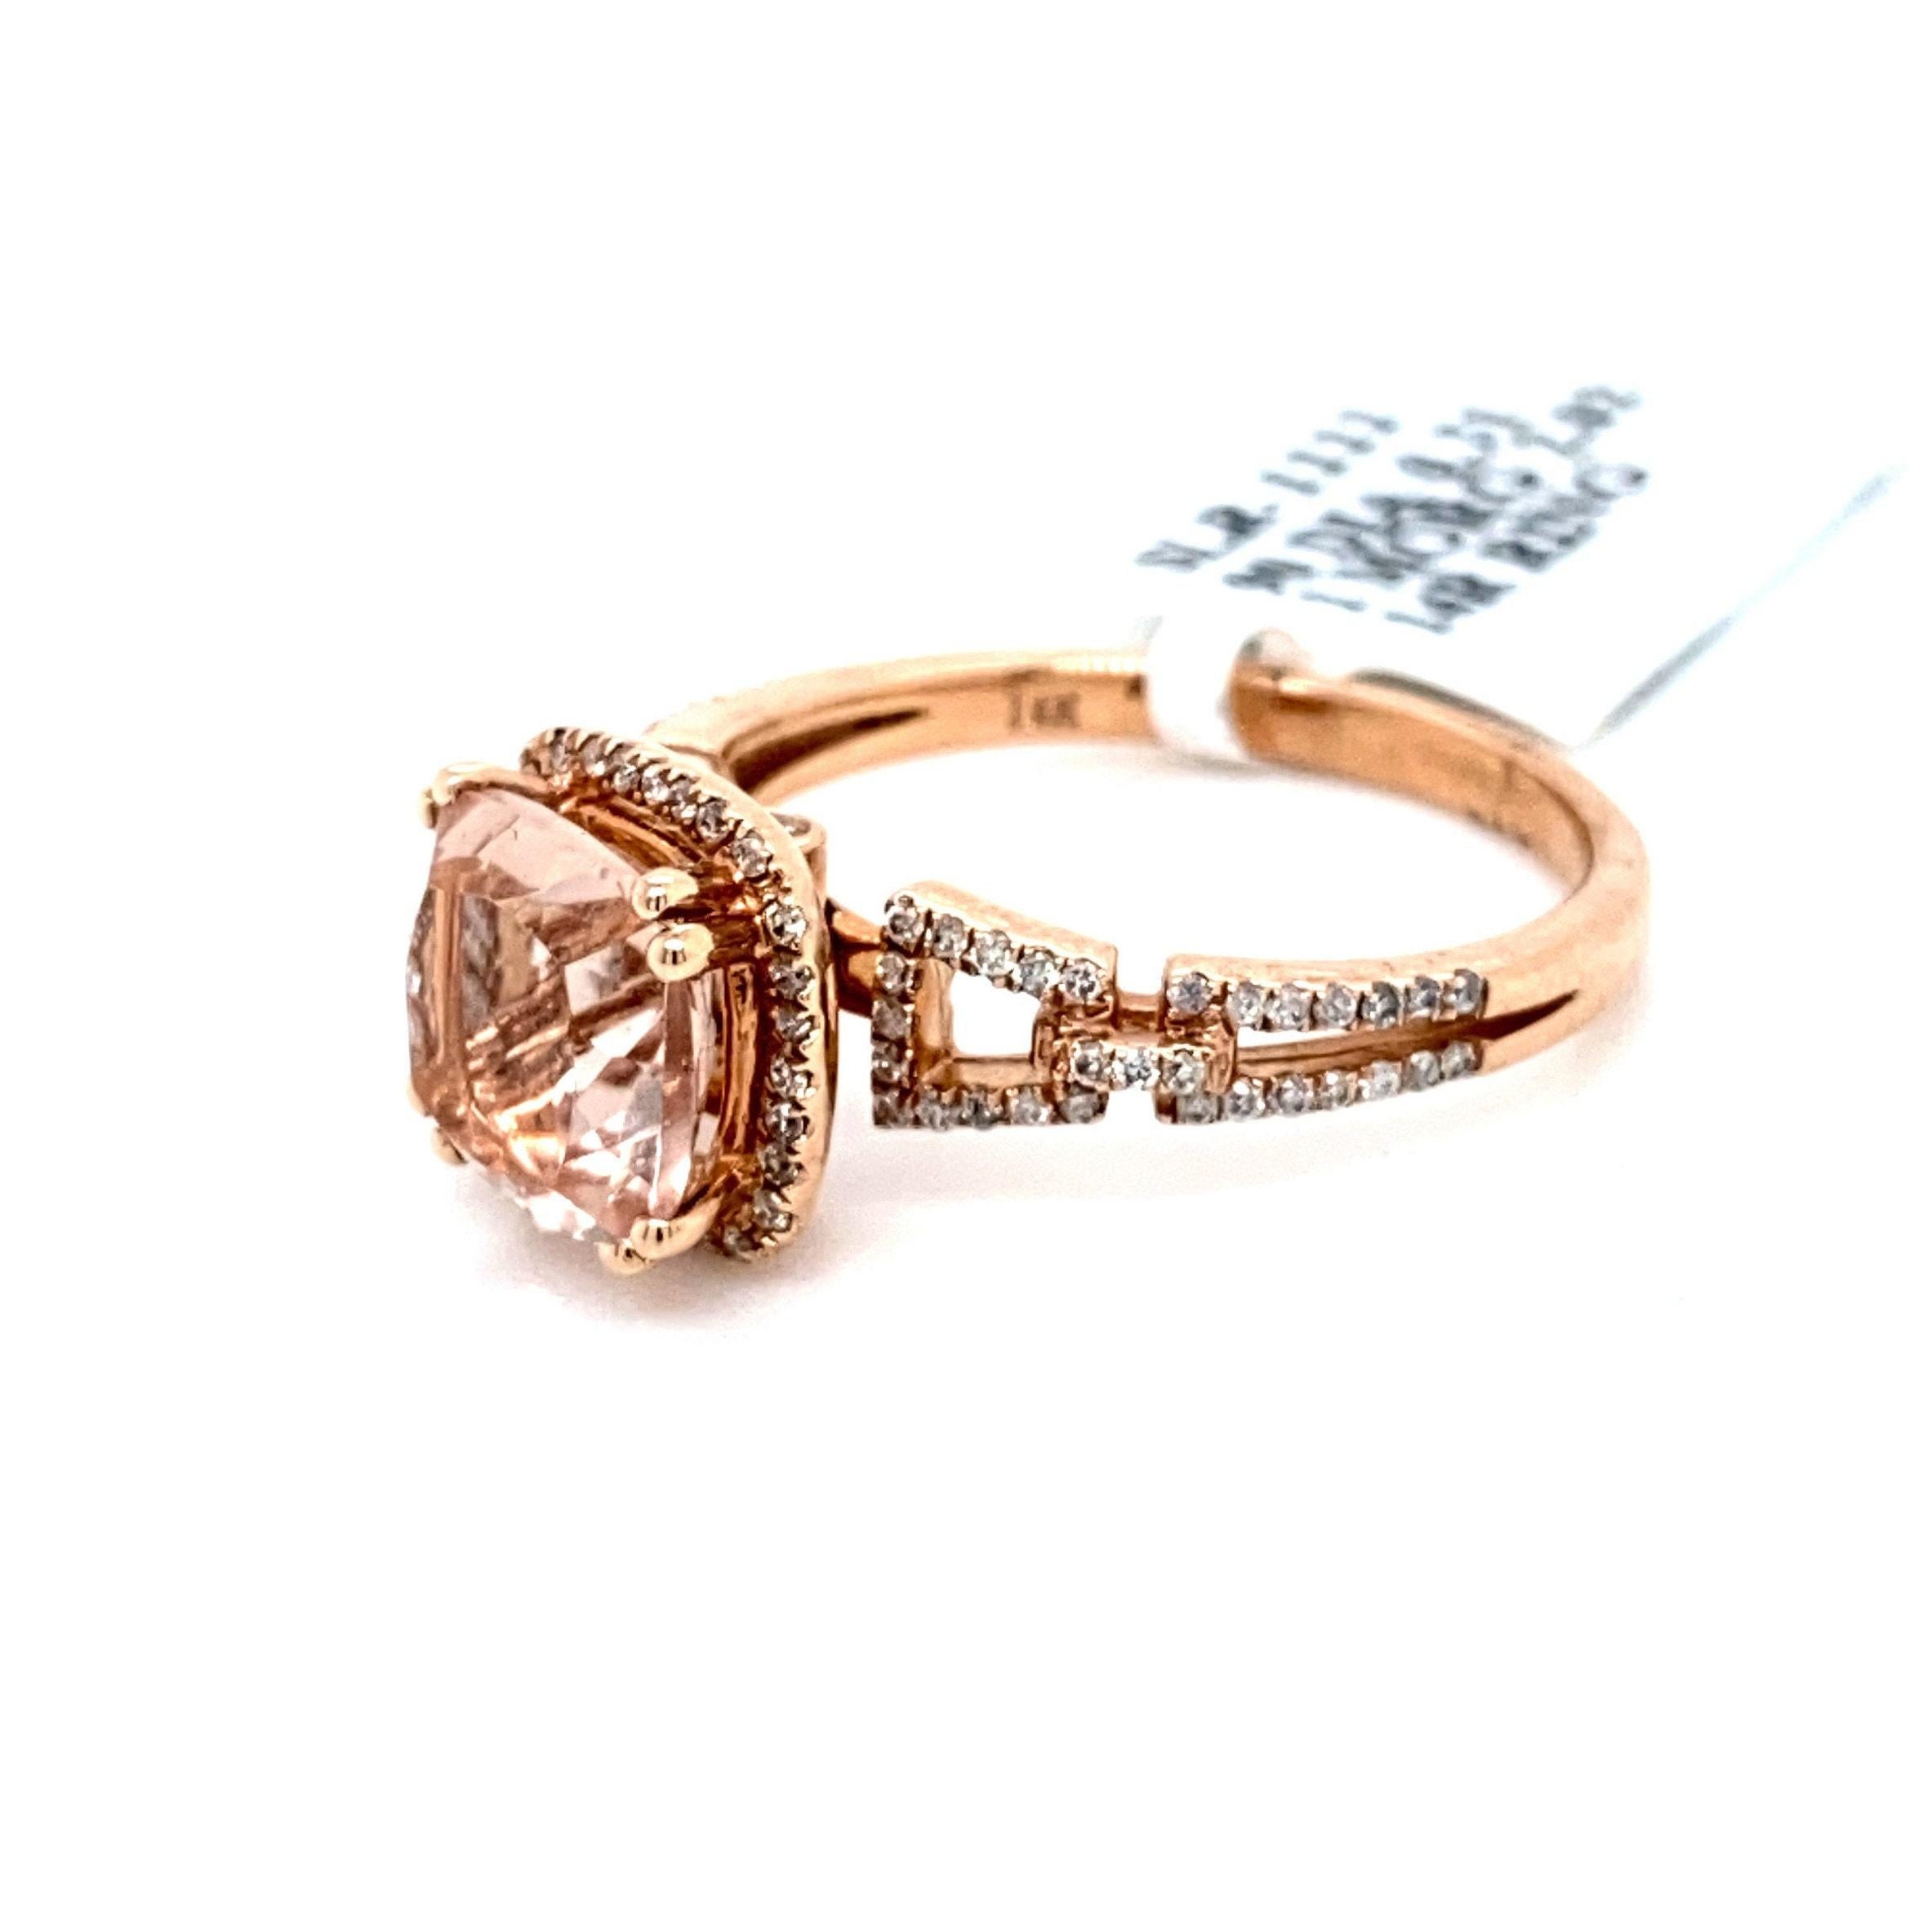 This stunning natural morganite and diamond halo ring set is in an alluring 14K rose gold chain link setting. The natural 8MM 2.02 carat Cushion cut morganite has an excellent peachy pink color (AAA quality gem) and is surrounded by a halo of round